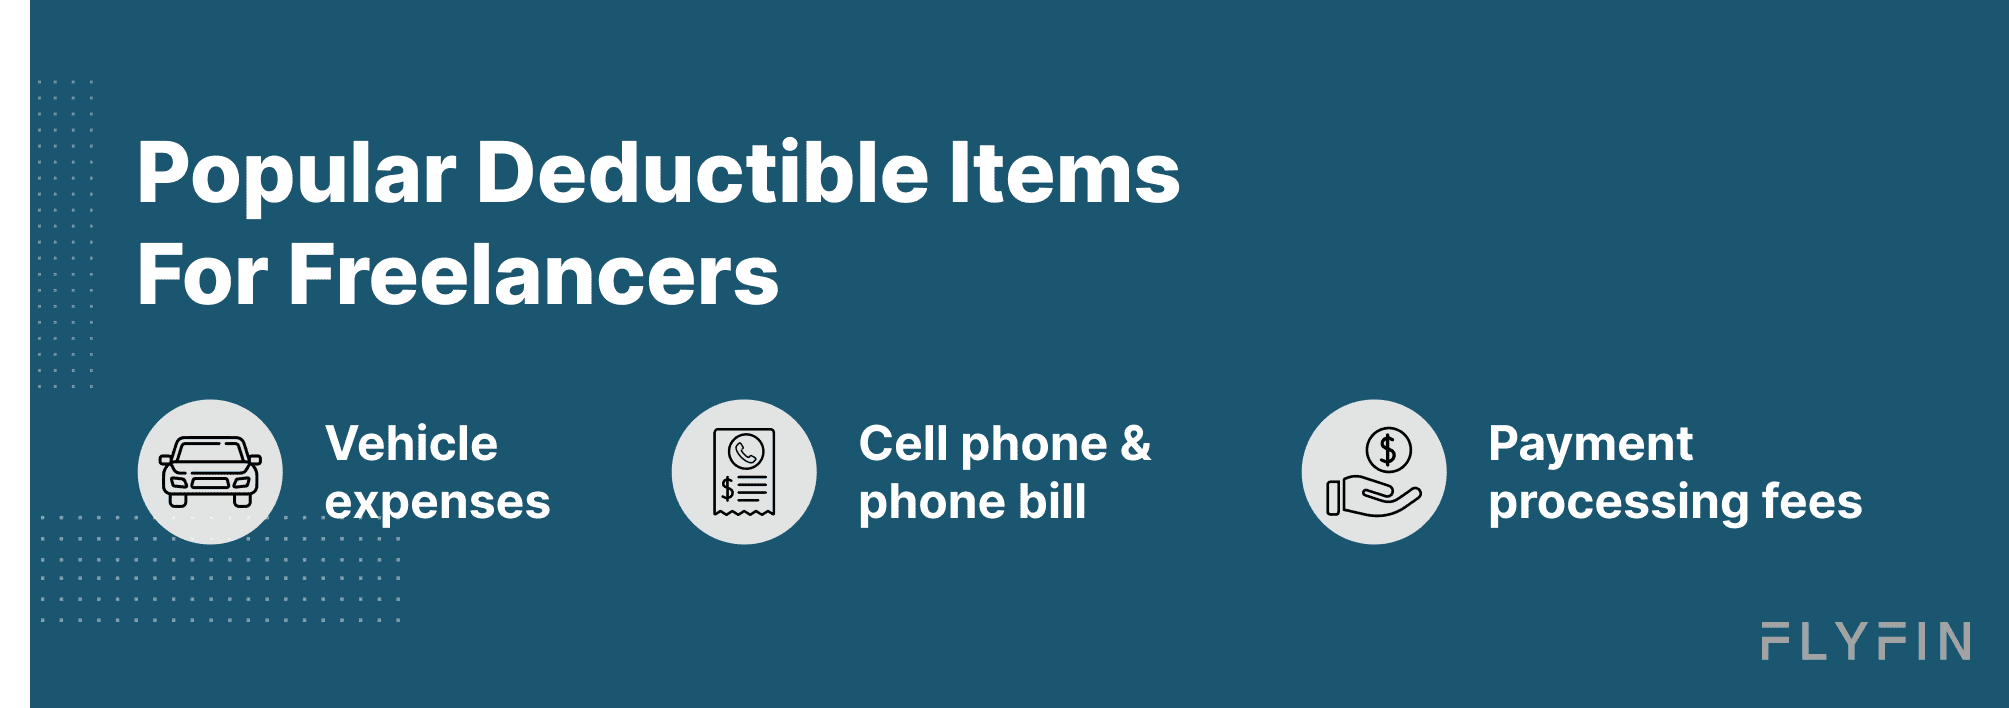 Image listing popular deductible items for freelancers including vehicle expenses, cell phone and phone bill, and payment processing fees. Useful for tax purposes.